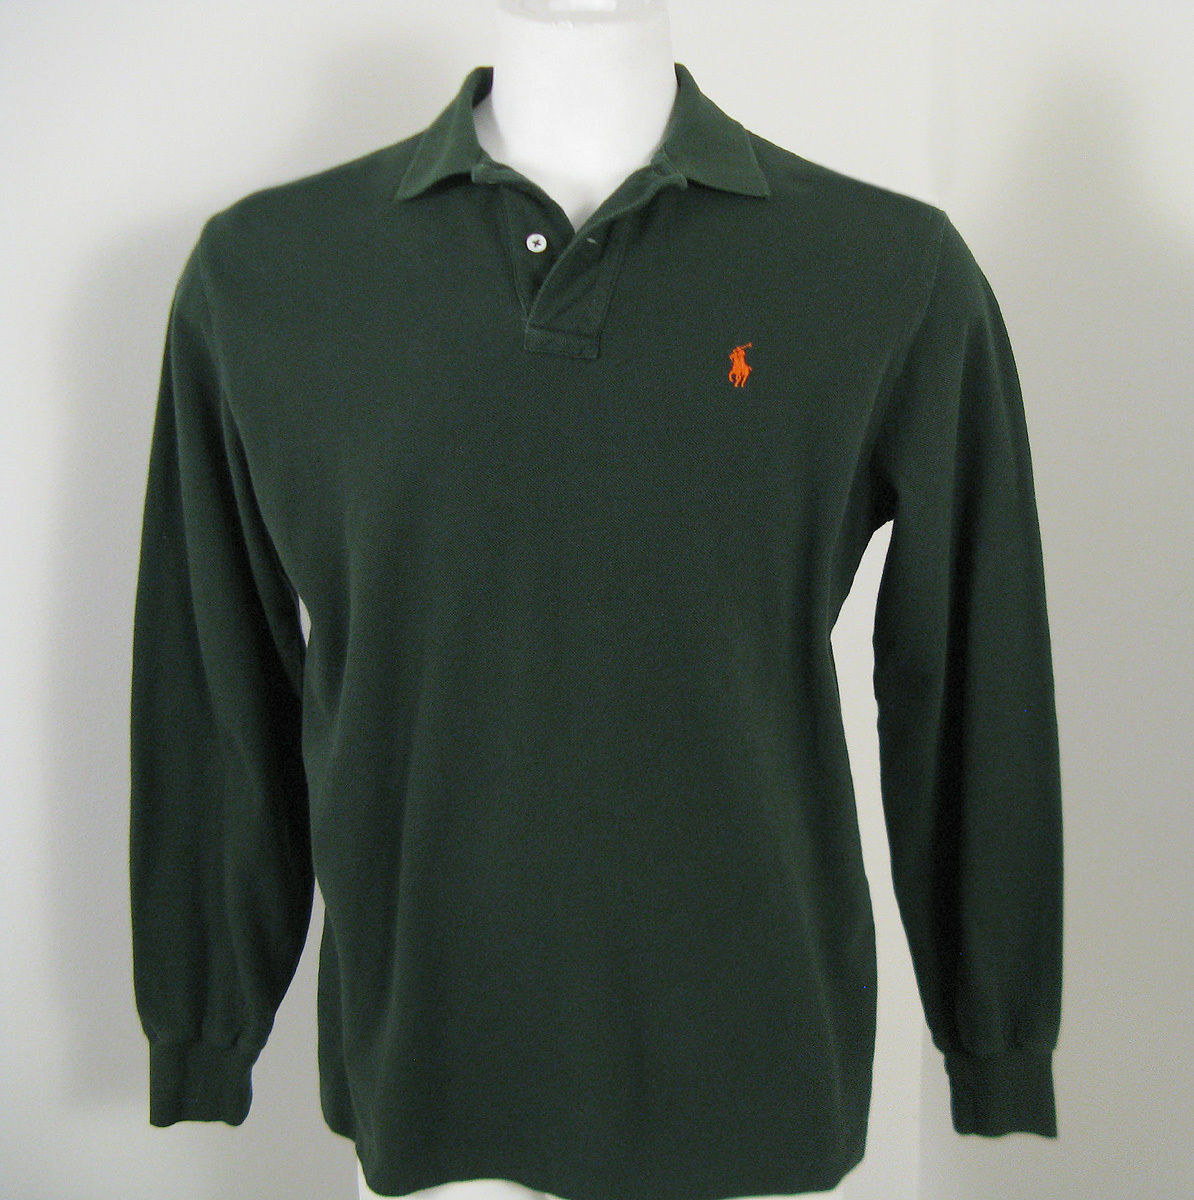 Primary image for NEW! Polo Ralph Lauren Long Sleeve Polo Shirt!  *100% Cotton Mesh Material*